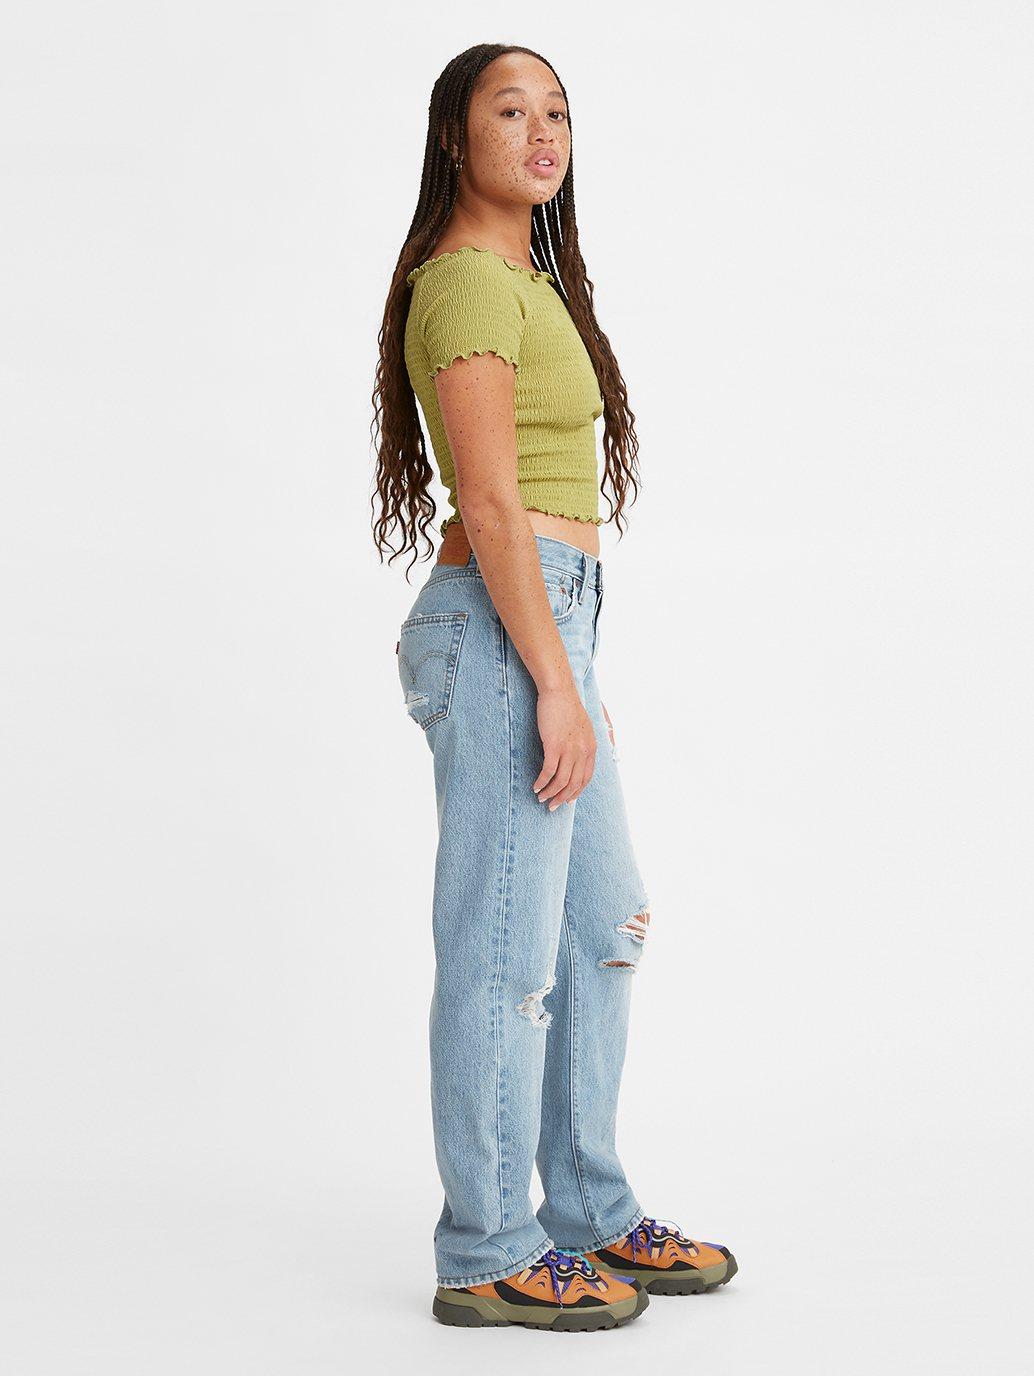 levis malaysia womens 501 90s jeans A19590004 03 Side